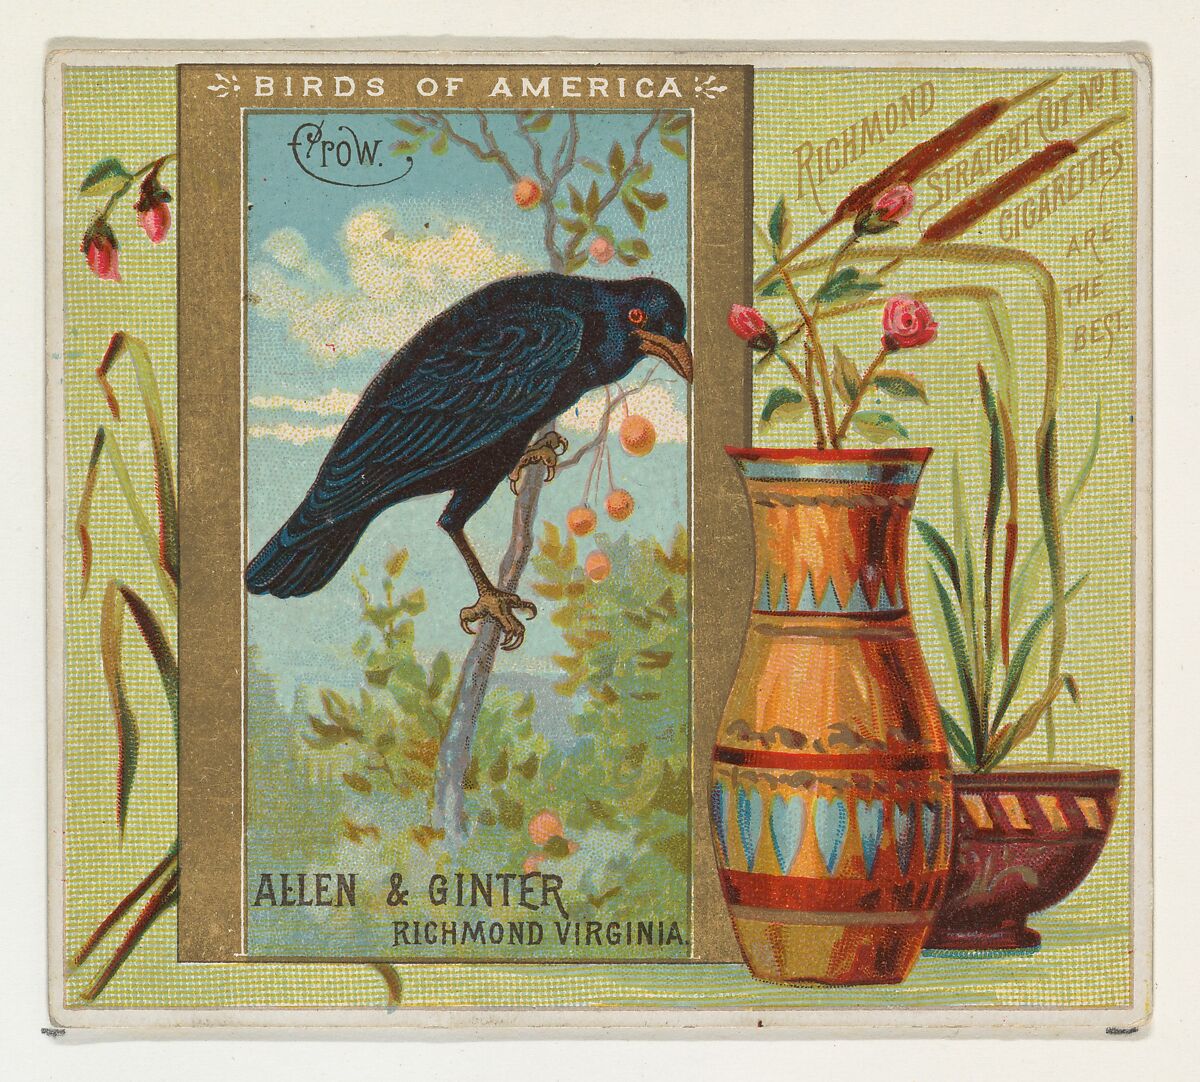 Crow, from the Birds of America series (N37) for Allen & Ginter Cigarettes, Issued by Allen &amp; Ginter (American, Richmond, Virginia), Commercial color lithograph 